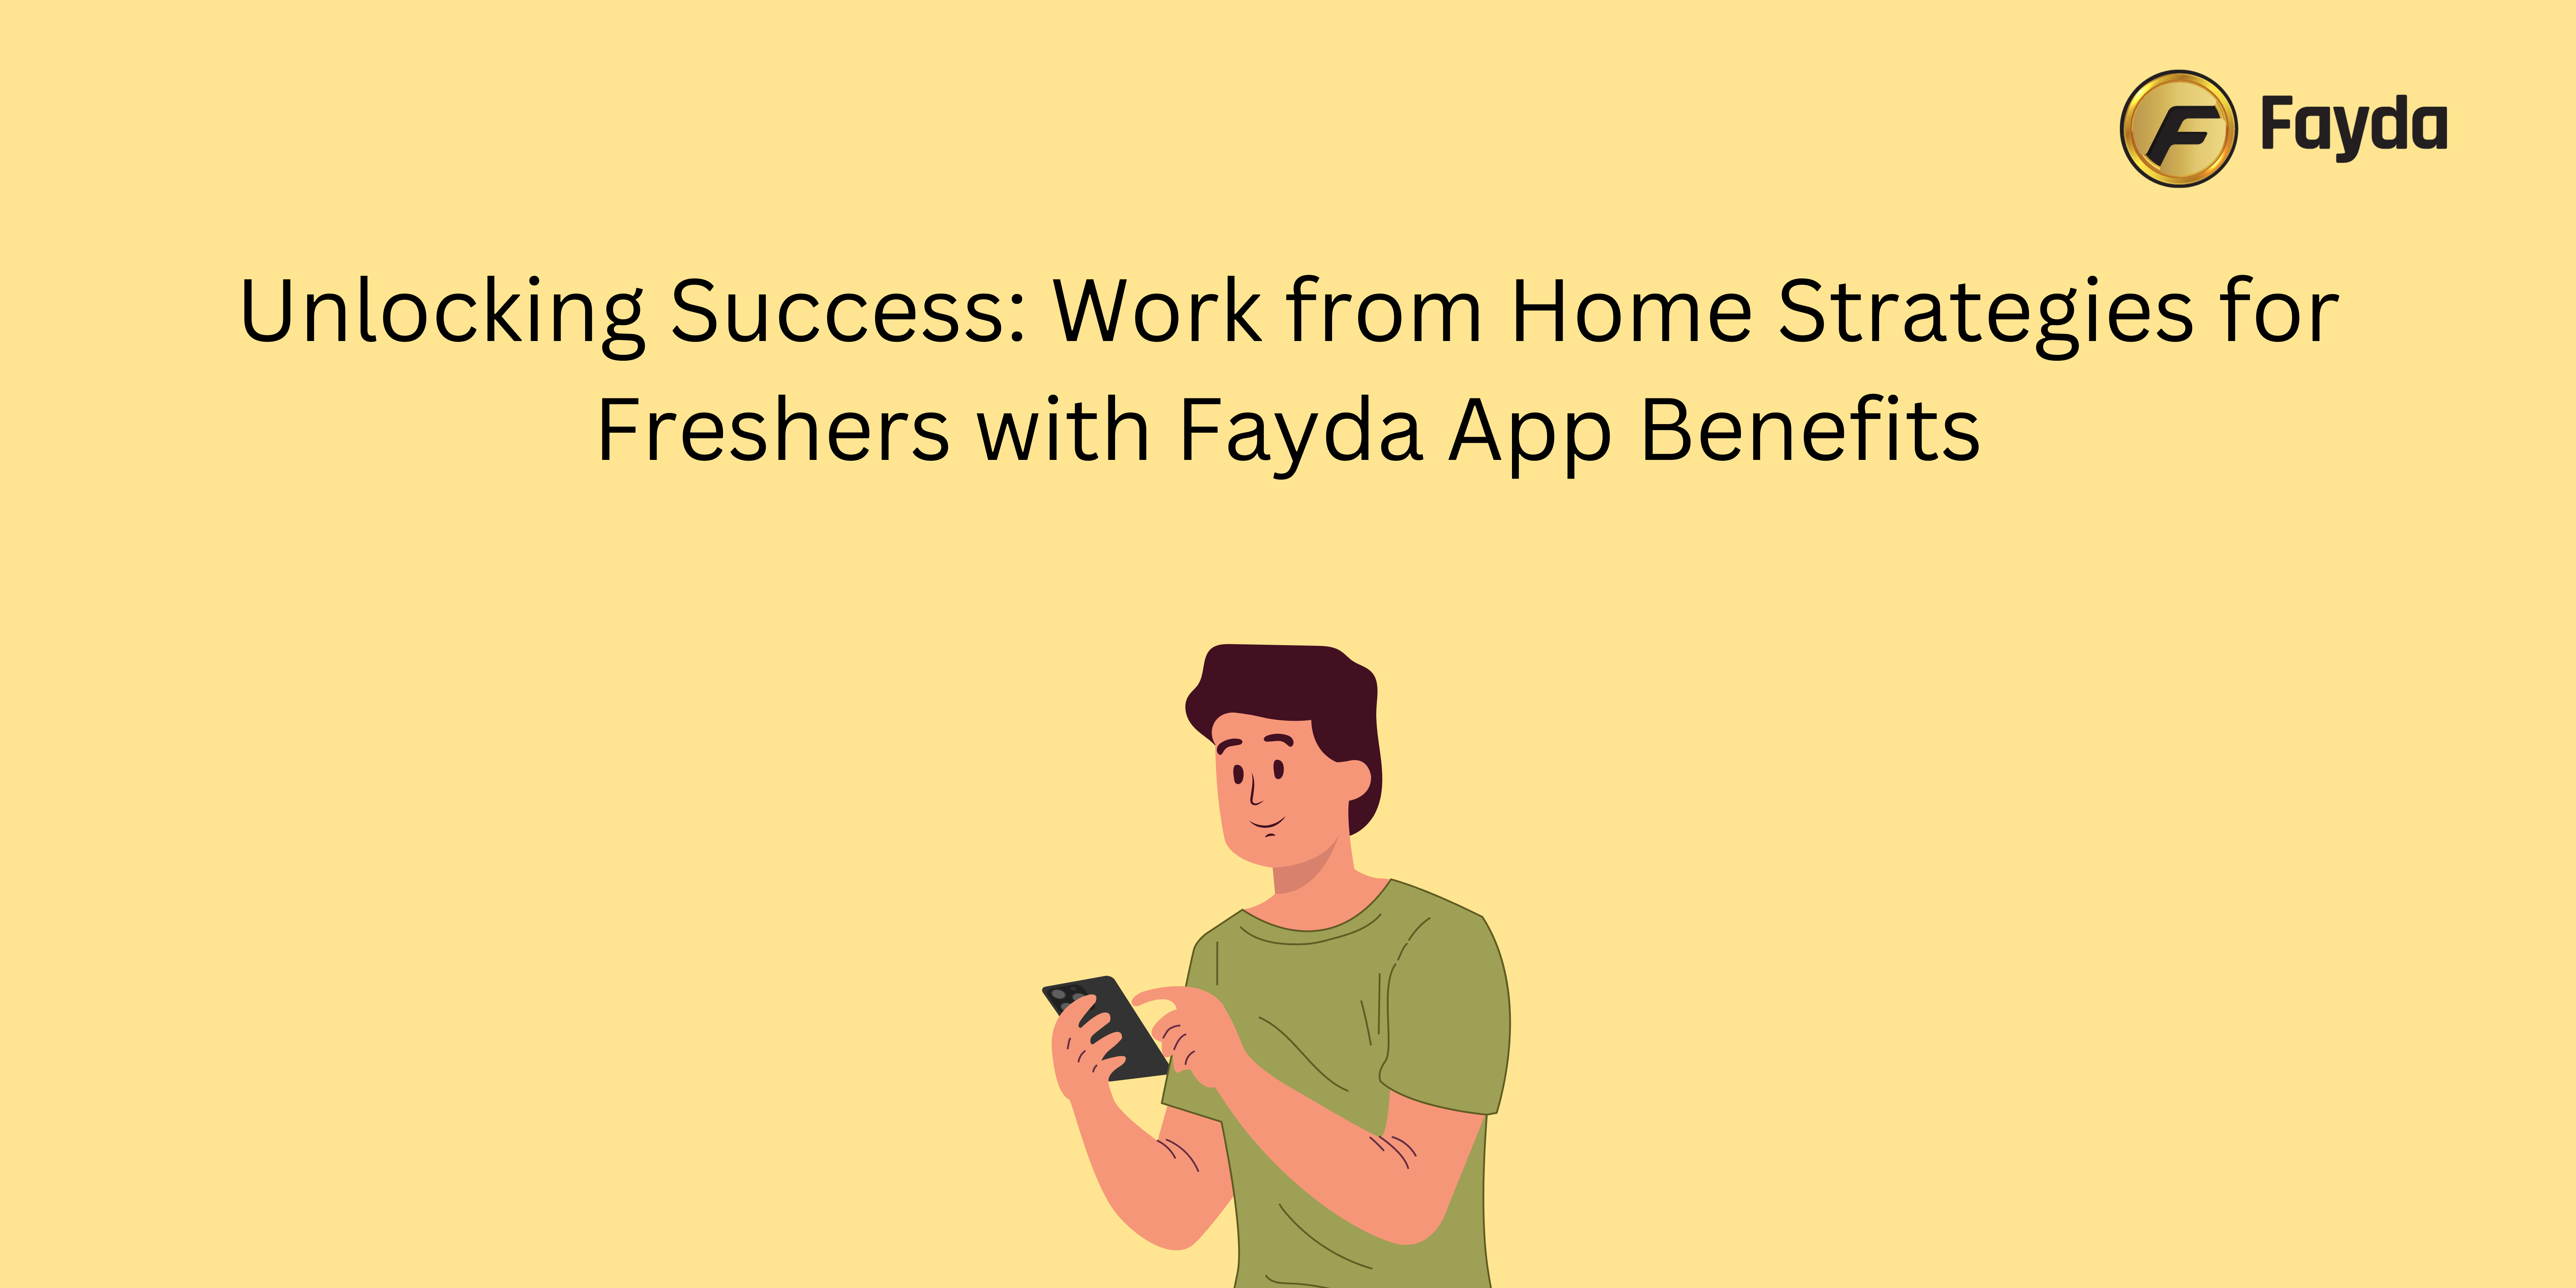 Unlocking Success: Work from Home Strategies for Freshers with Fayda App Benefits